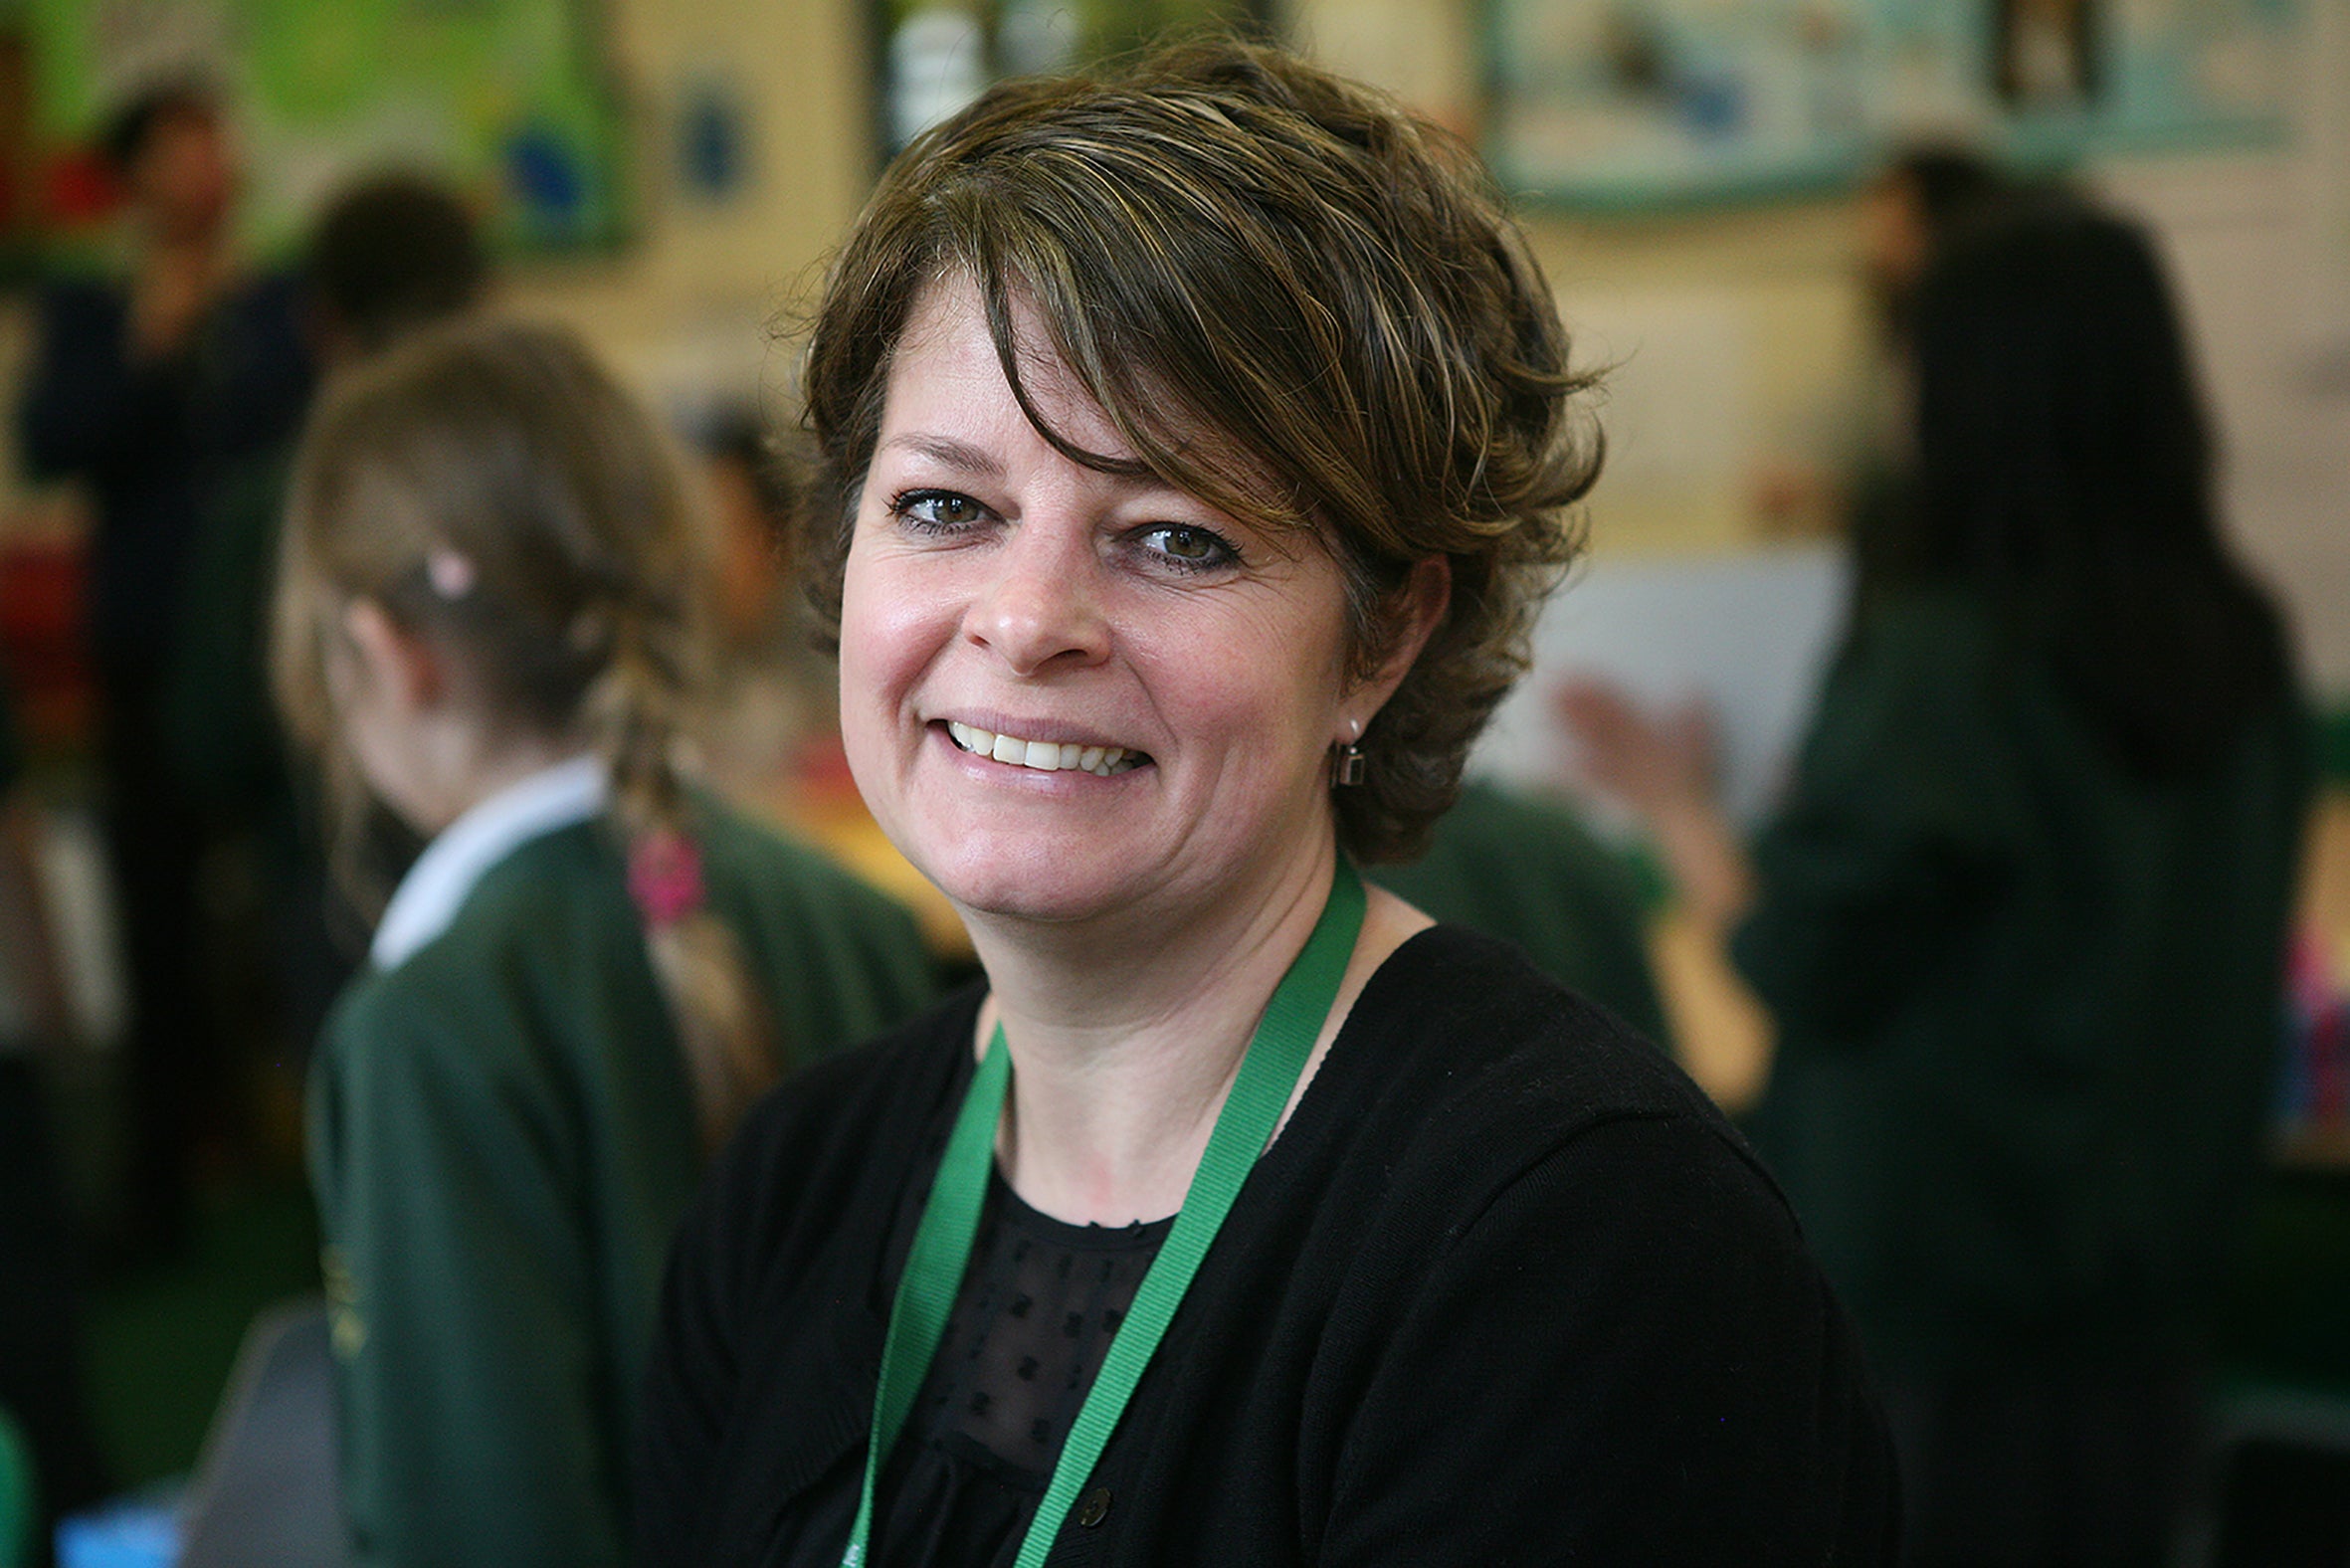 School headteacher Ruth Perry took her own life after an Ofsted inspection